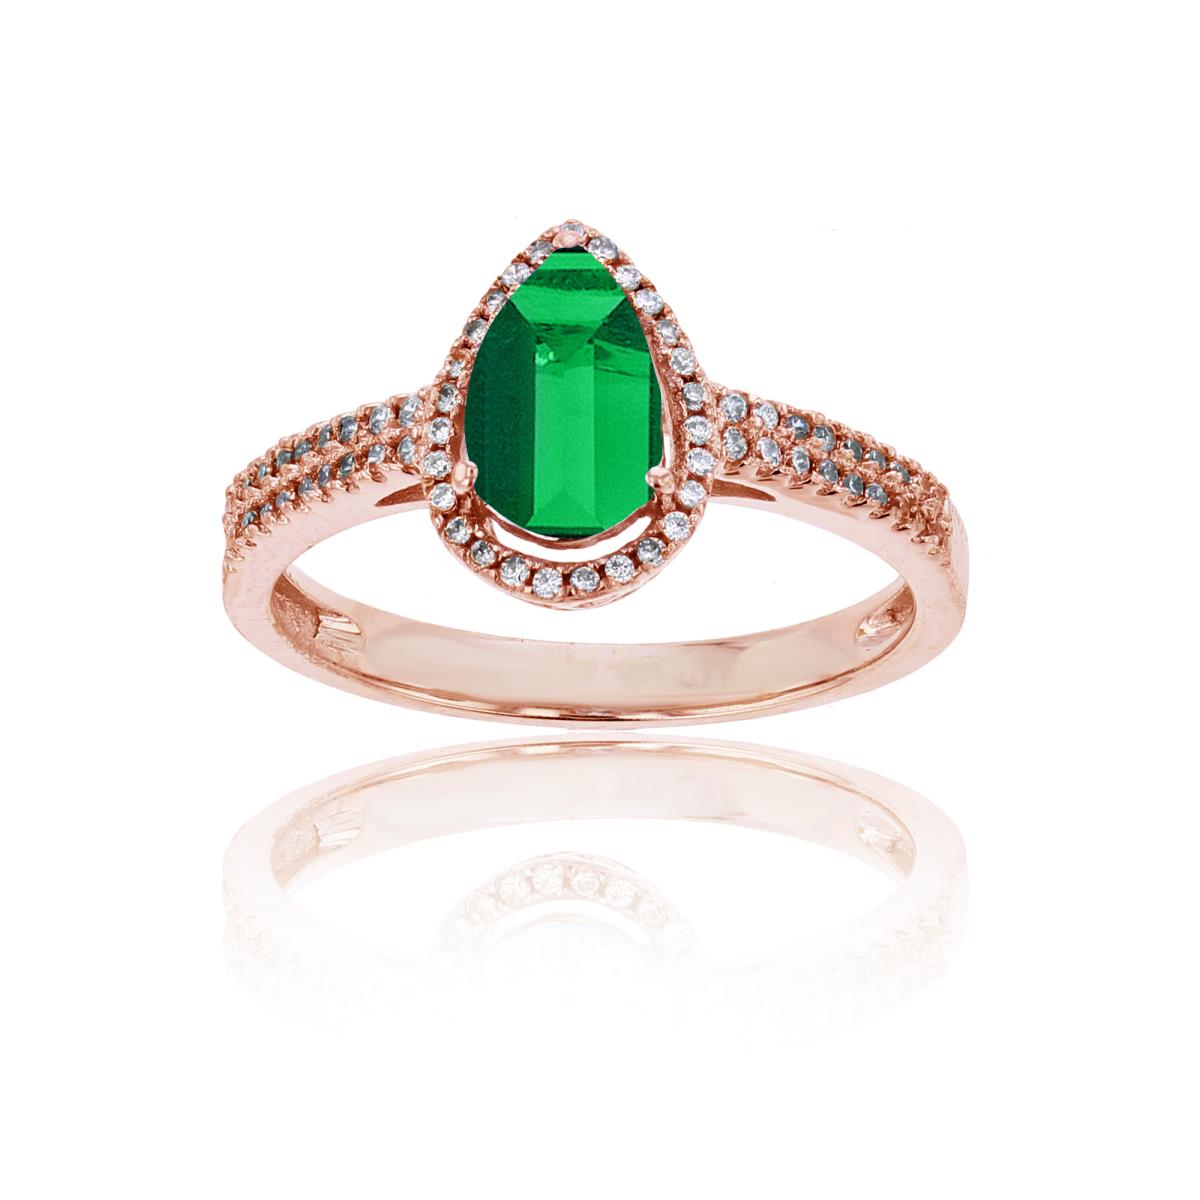 14K Rose Gold 0.20 CTTW Round Diamond & 8x5mm Pear Cut Created Emerald Halo Ring